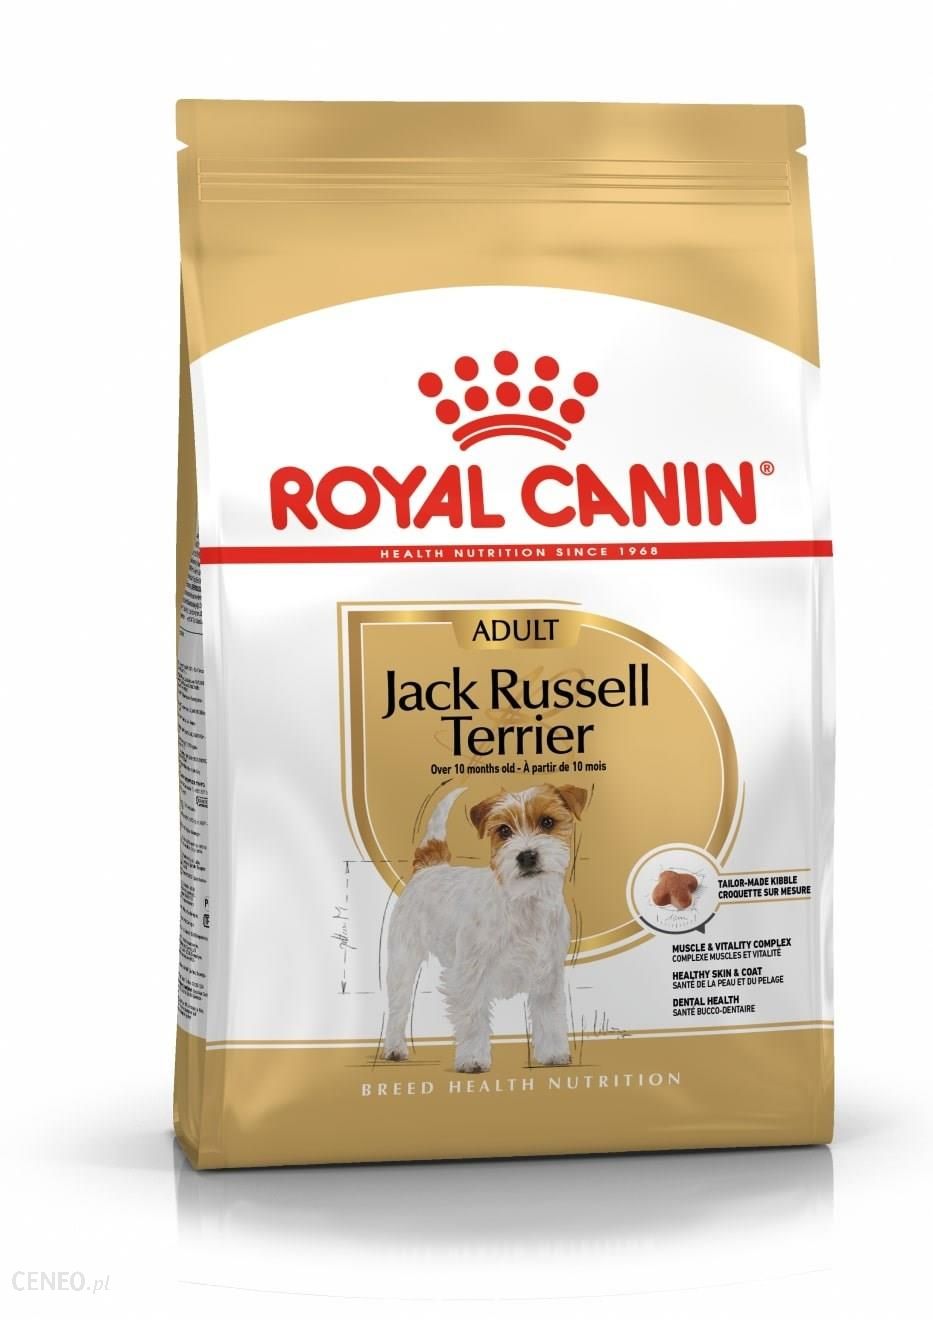 Royal Canin Jack Russell Terrier Adult 2x7